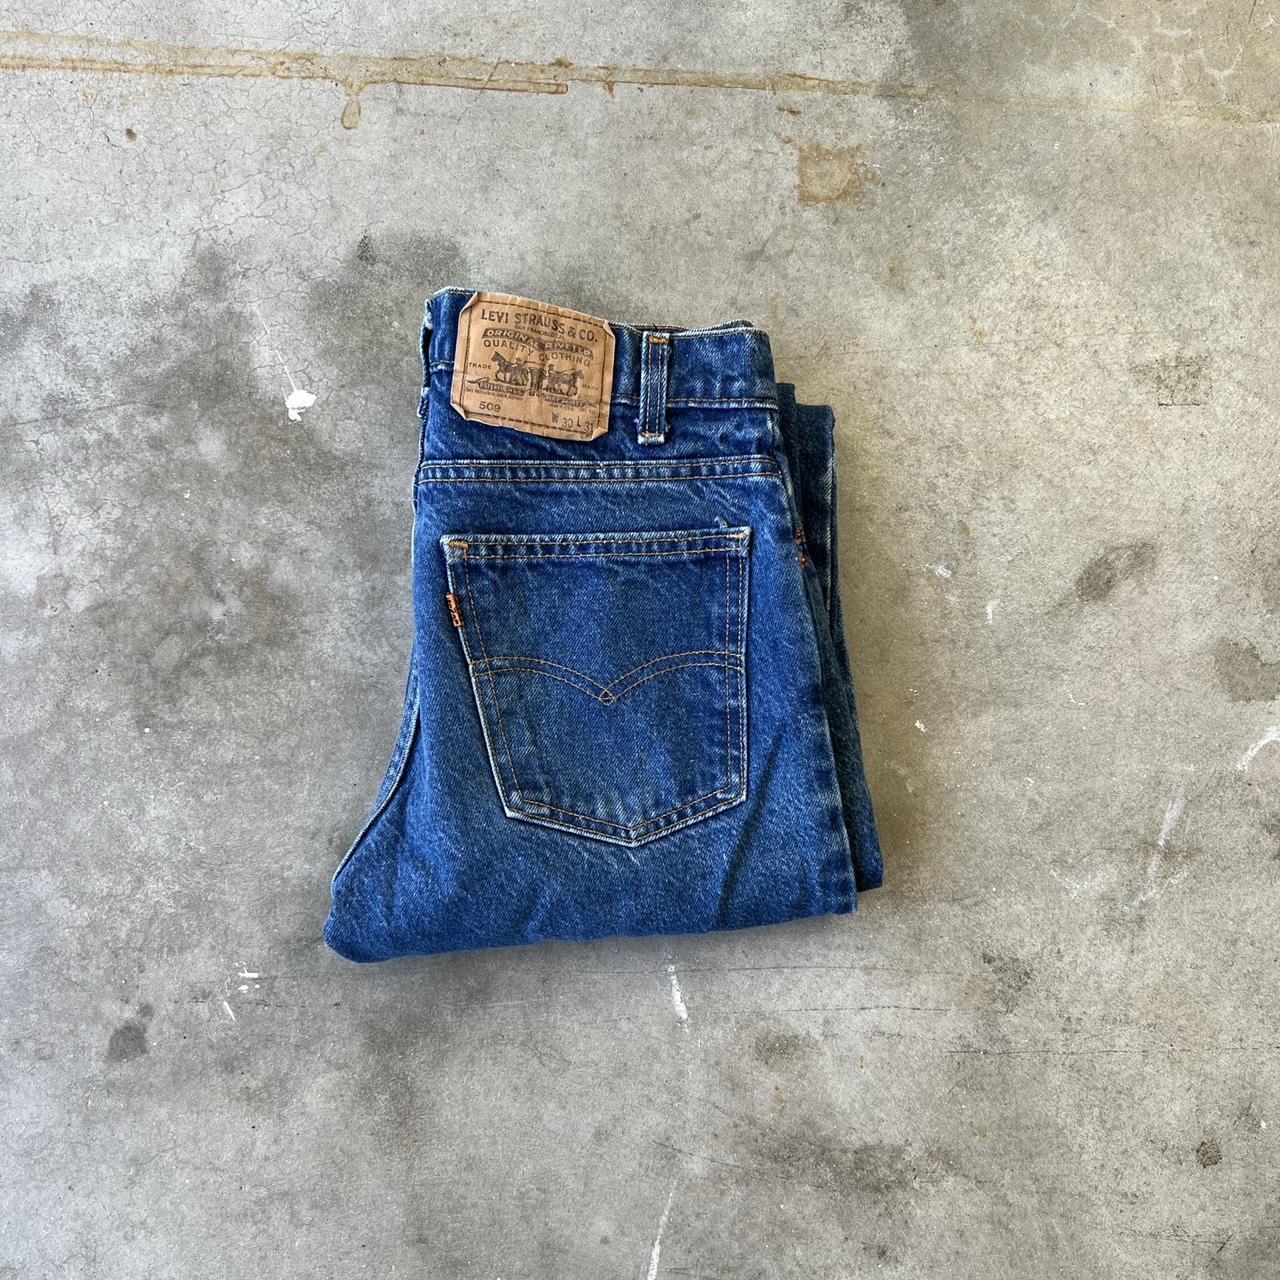 Levi's Men's Navy and Blue Jeans